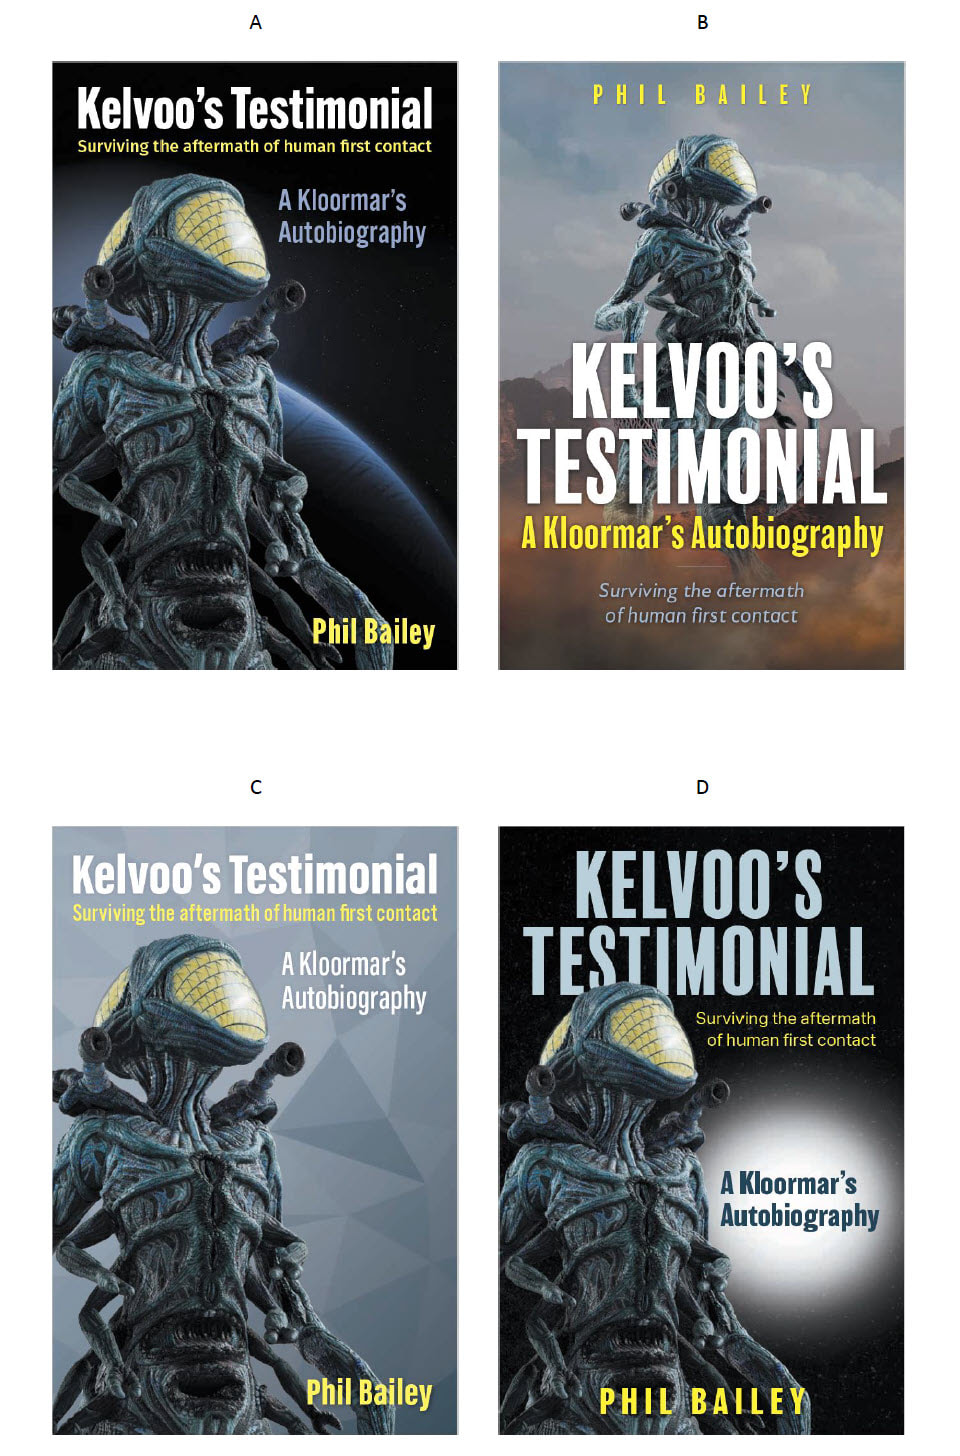 Kelvoo's Testimonial - Book cover designs for voting